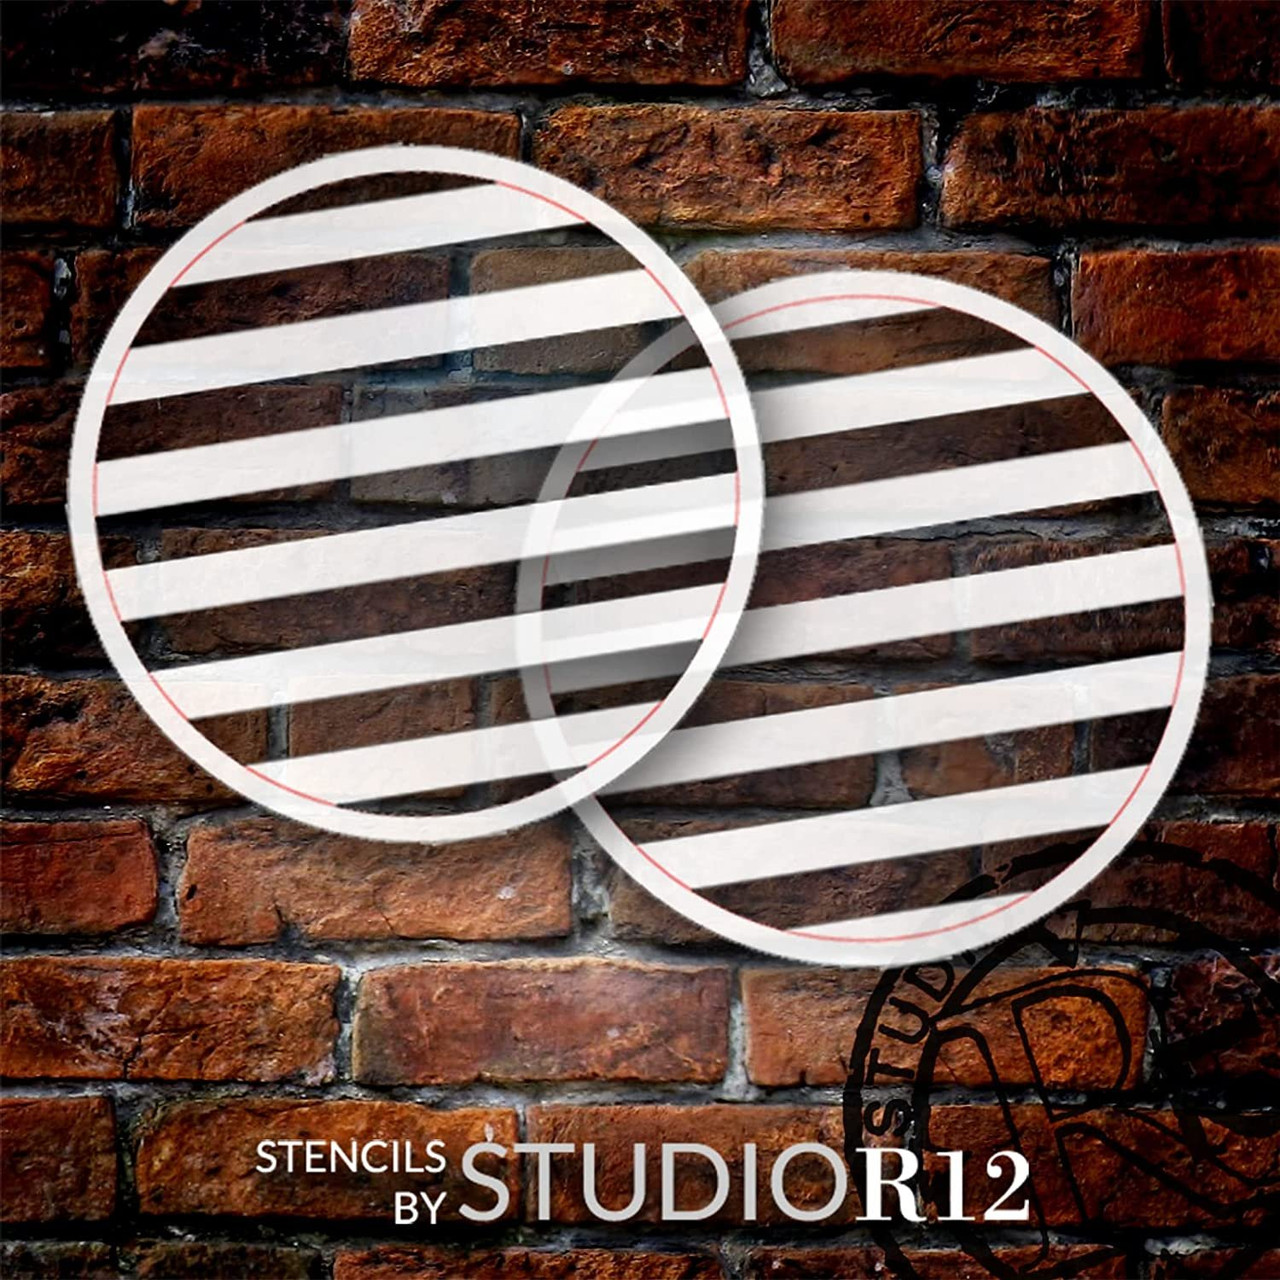 2 Part Banding on Round Stencil Set by StudioR12 - Select Size - USA Made - Craft DIY Patterned Home Decor | Paint Banded Accent Wood Sign | Reusable Mylar Template